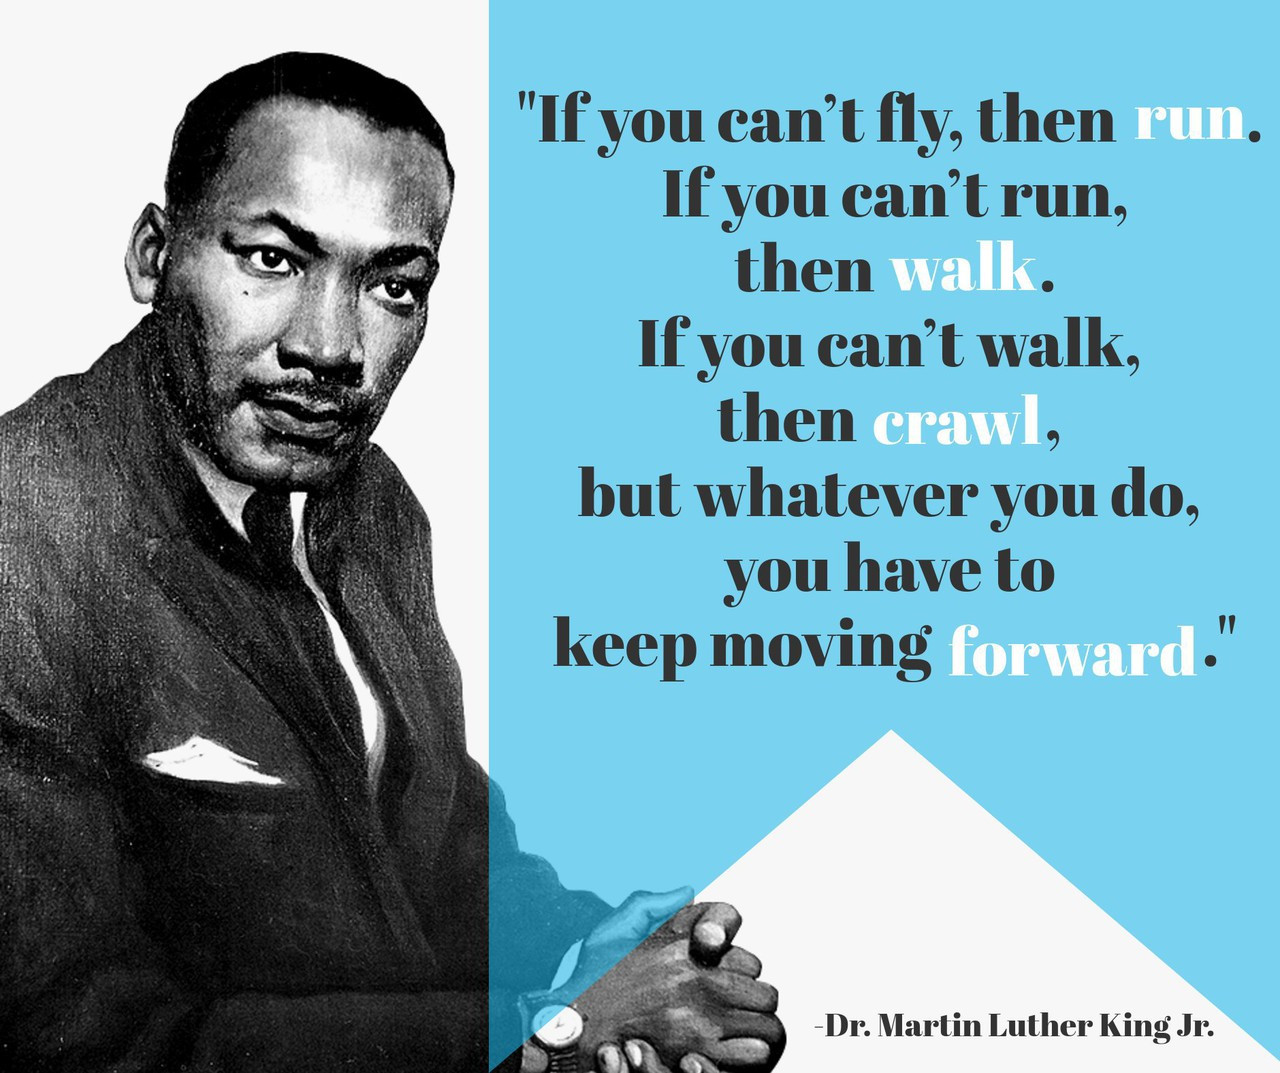 Martin Luther King Jr.Leadership Quotes
 10 Inspirational Leadership Quotes by Martin Luther King Jr